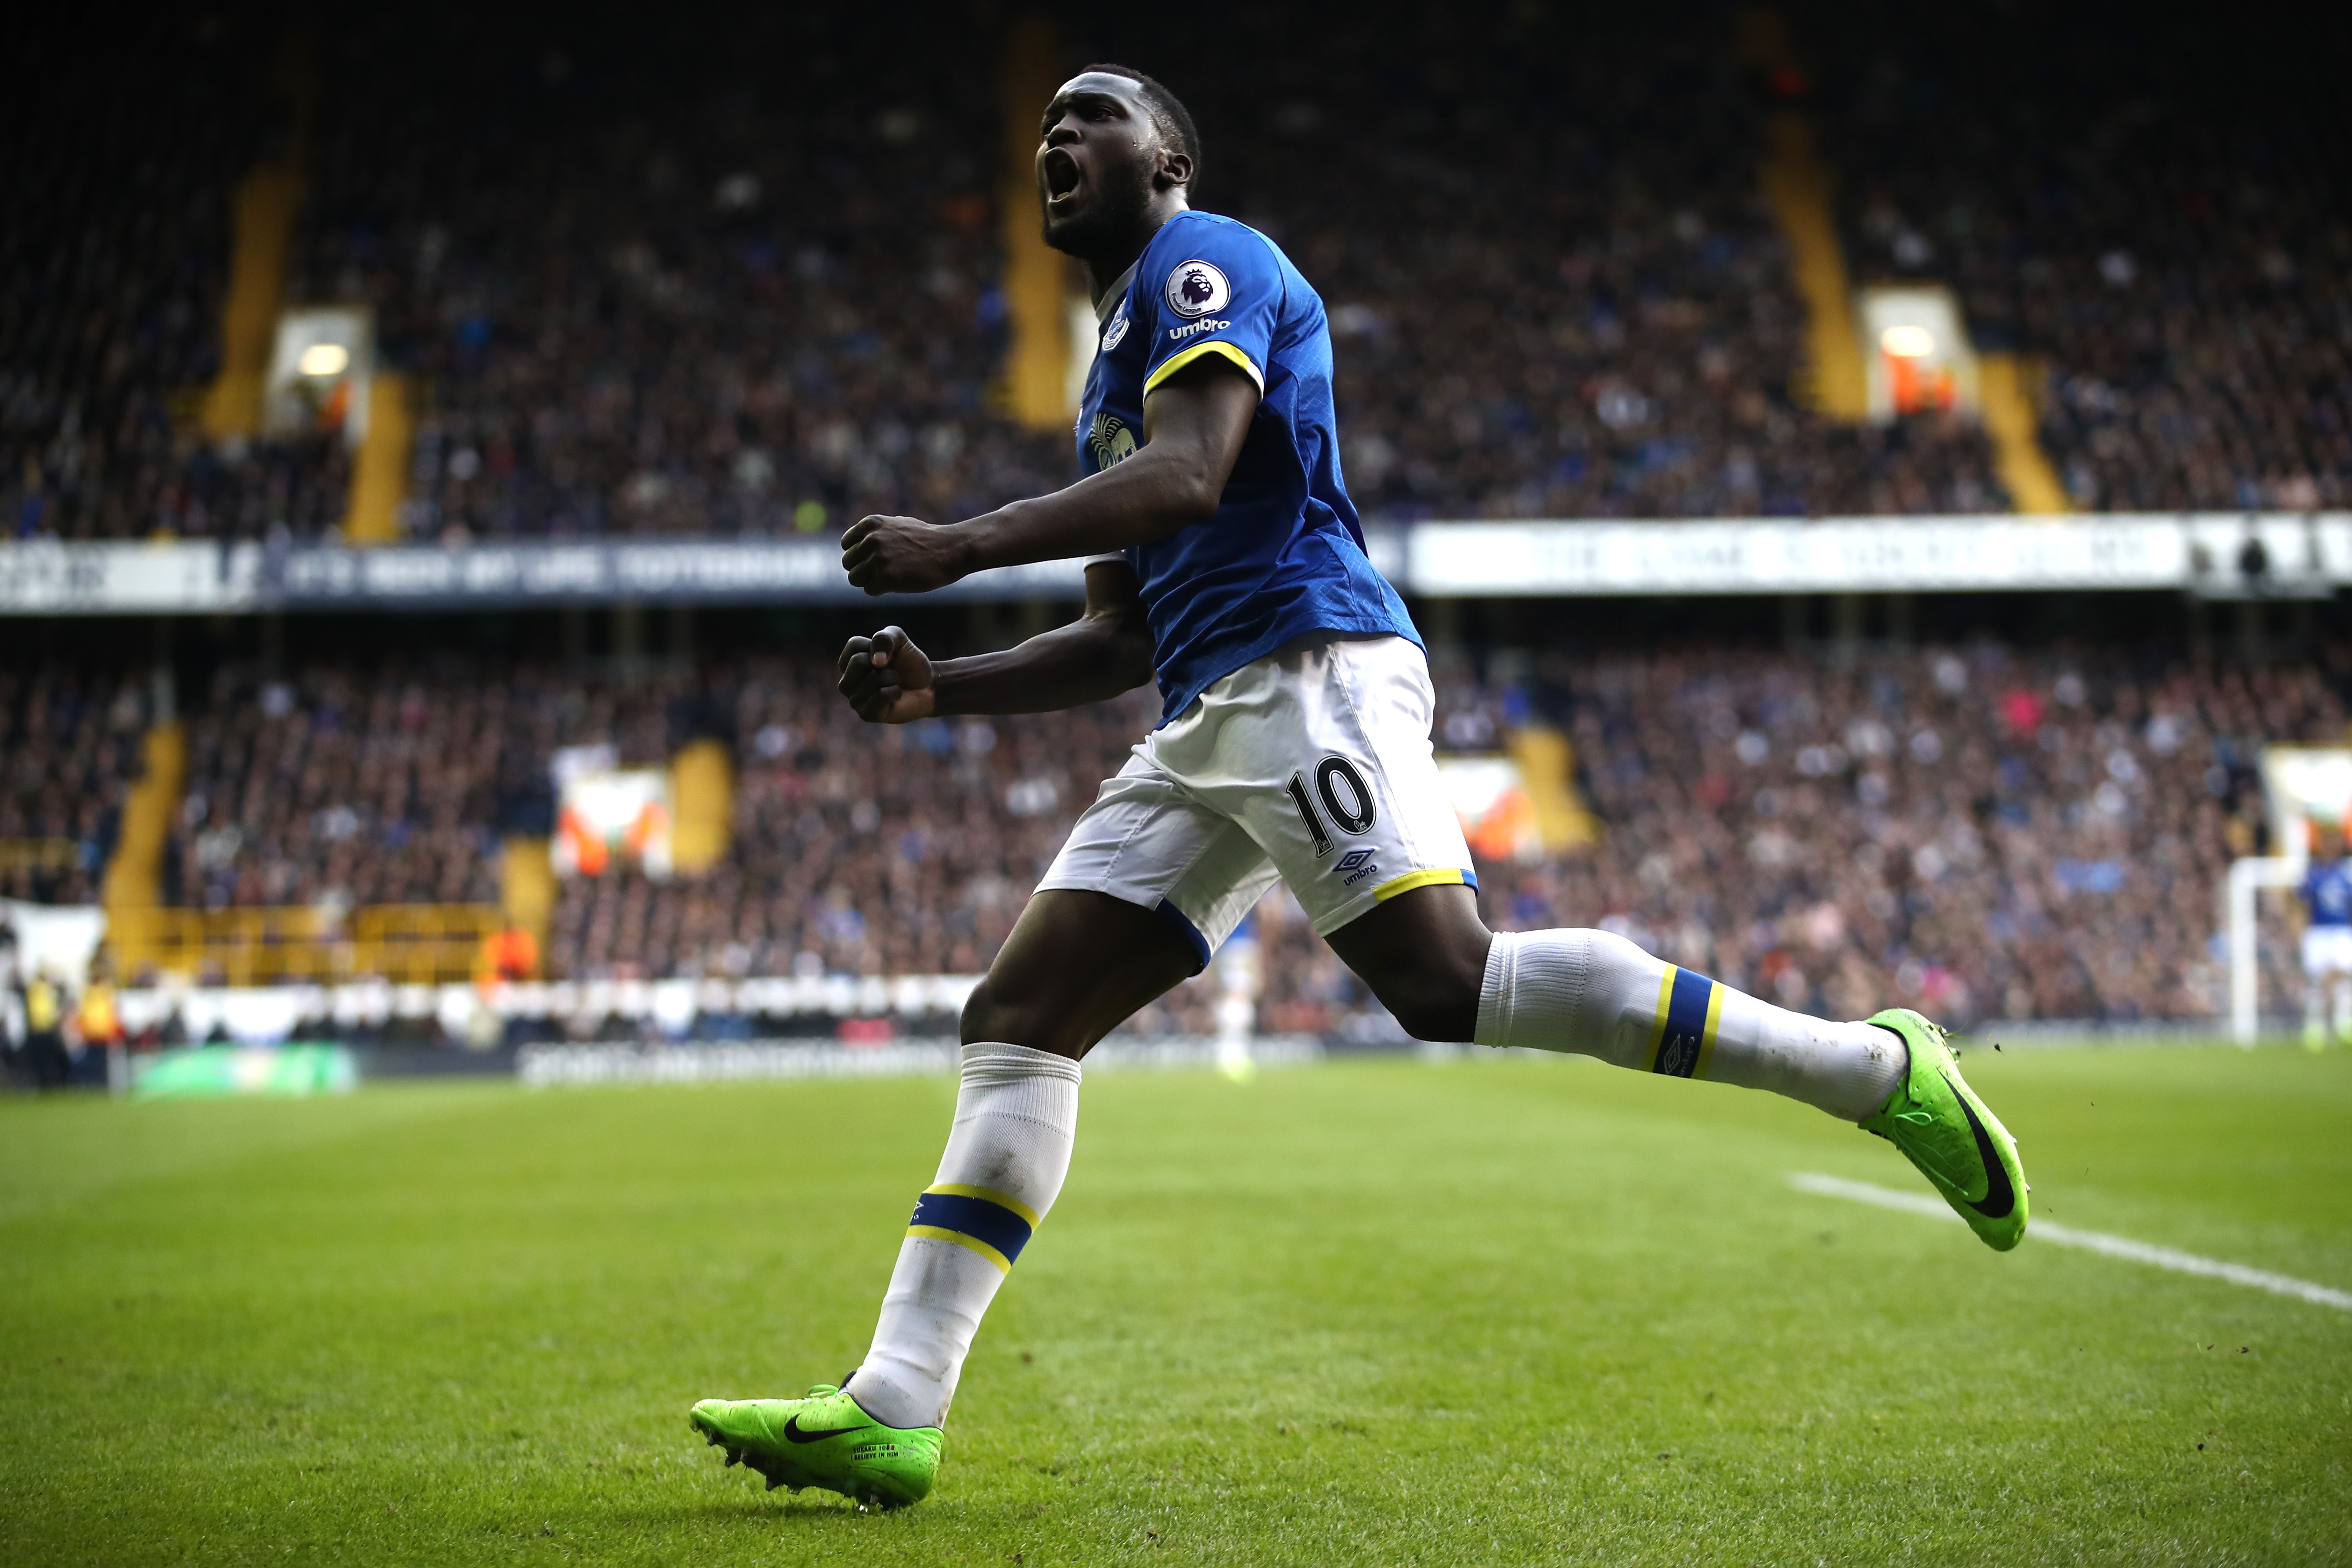 LONDON, ENGLAND - MARCH 05:  Romelu Lukaku of Everton celebrates after he scores his sides first goal during the Premier League match between Tottenham Hotspur and Everton at White Hart Lane on March 5, 2017 in London, England.  (Photo by Julian Finney/Getty Images)